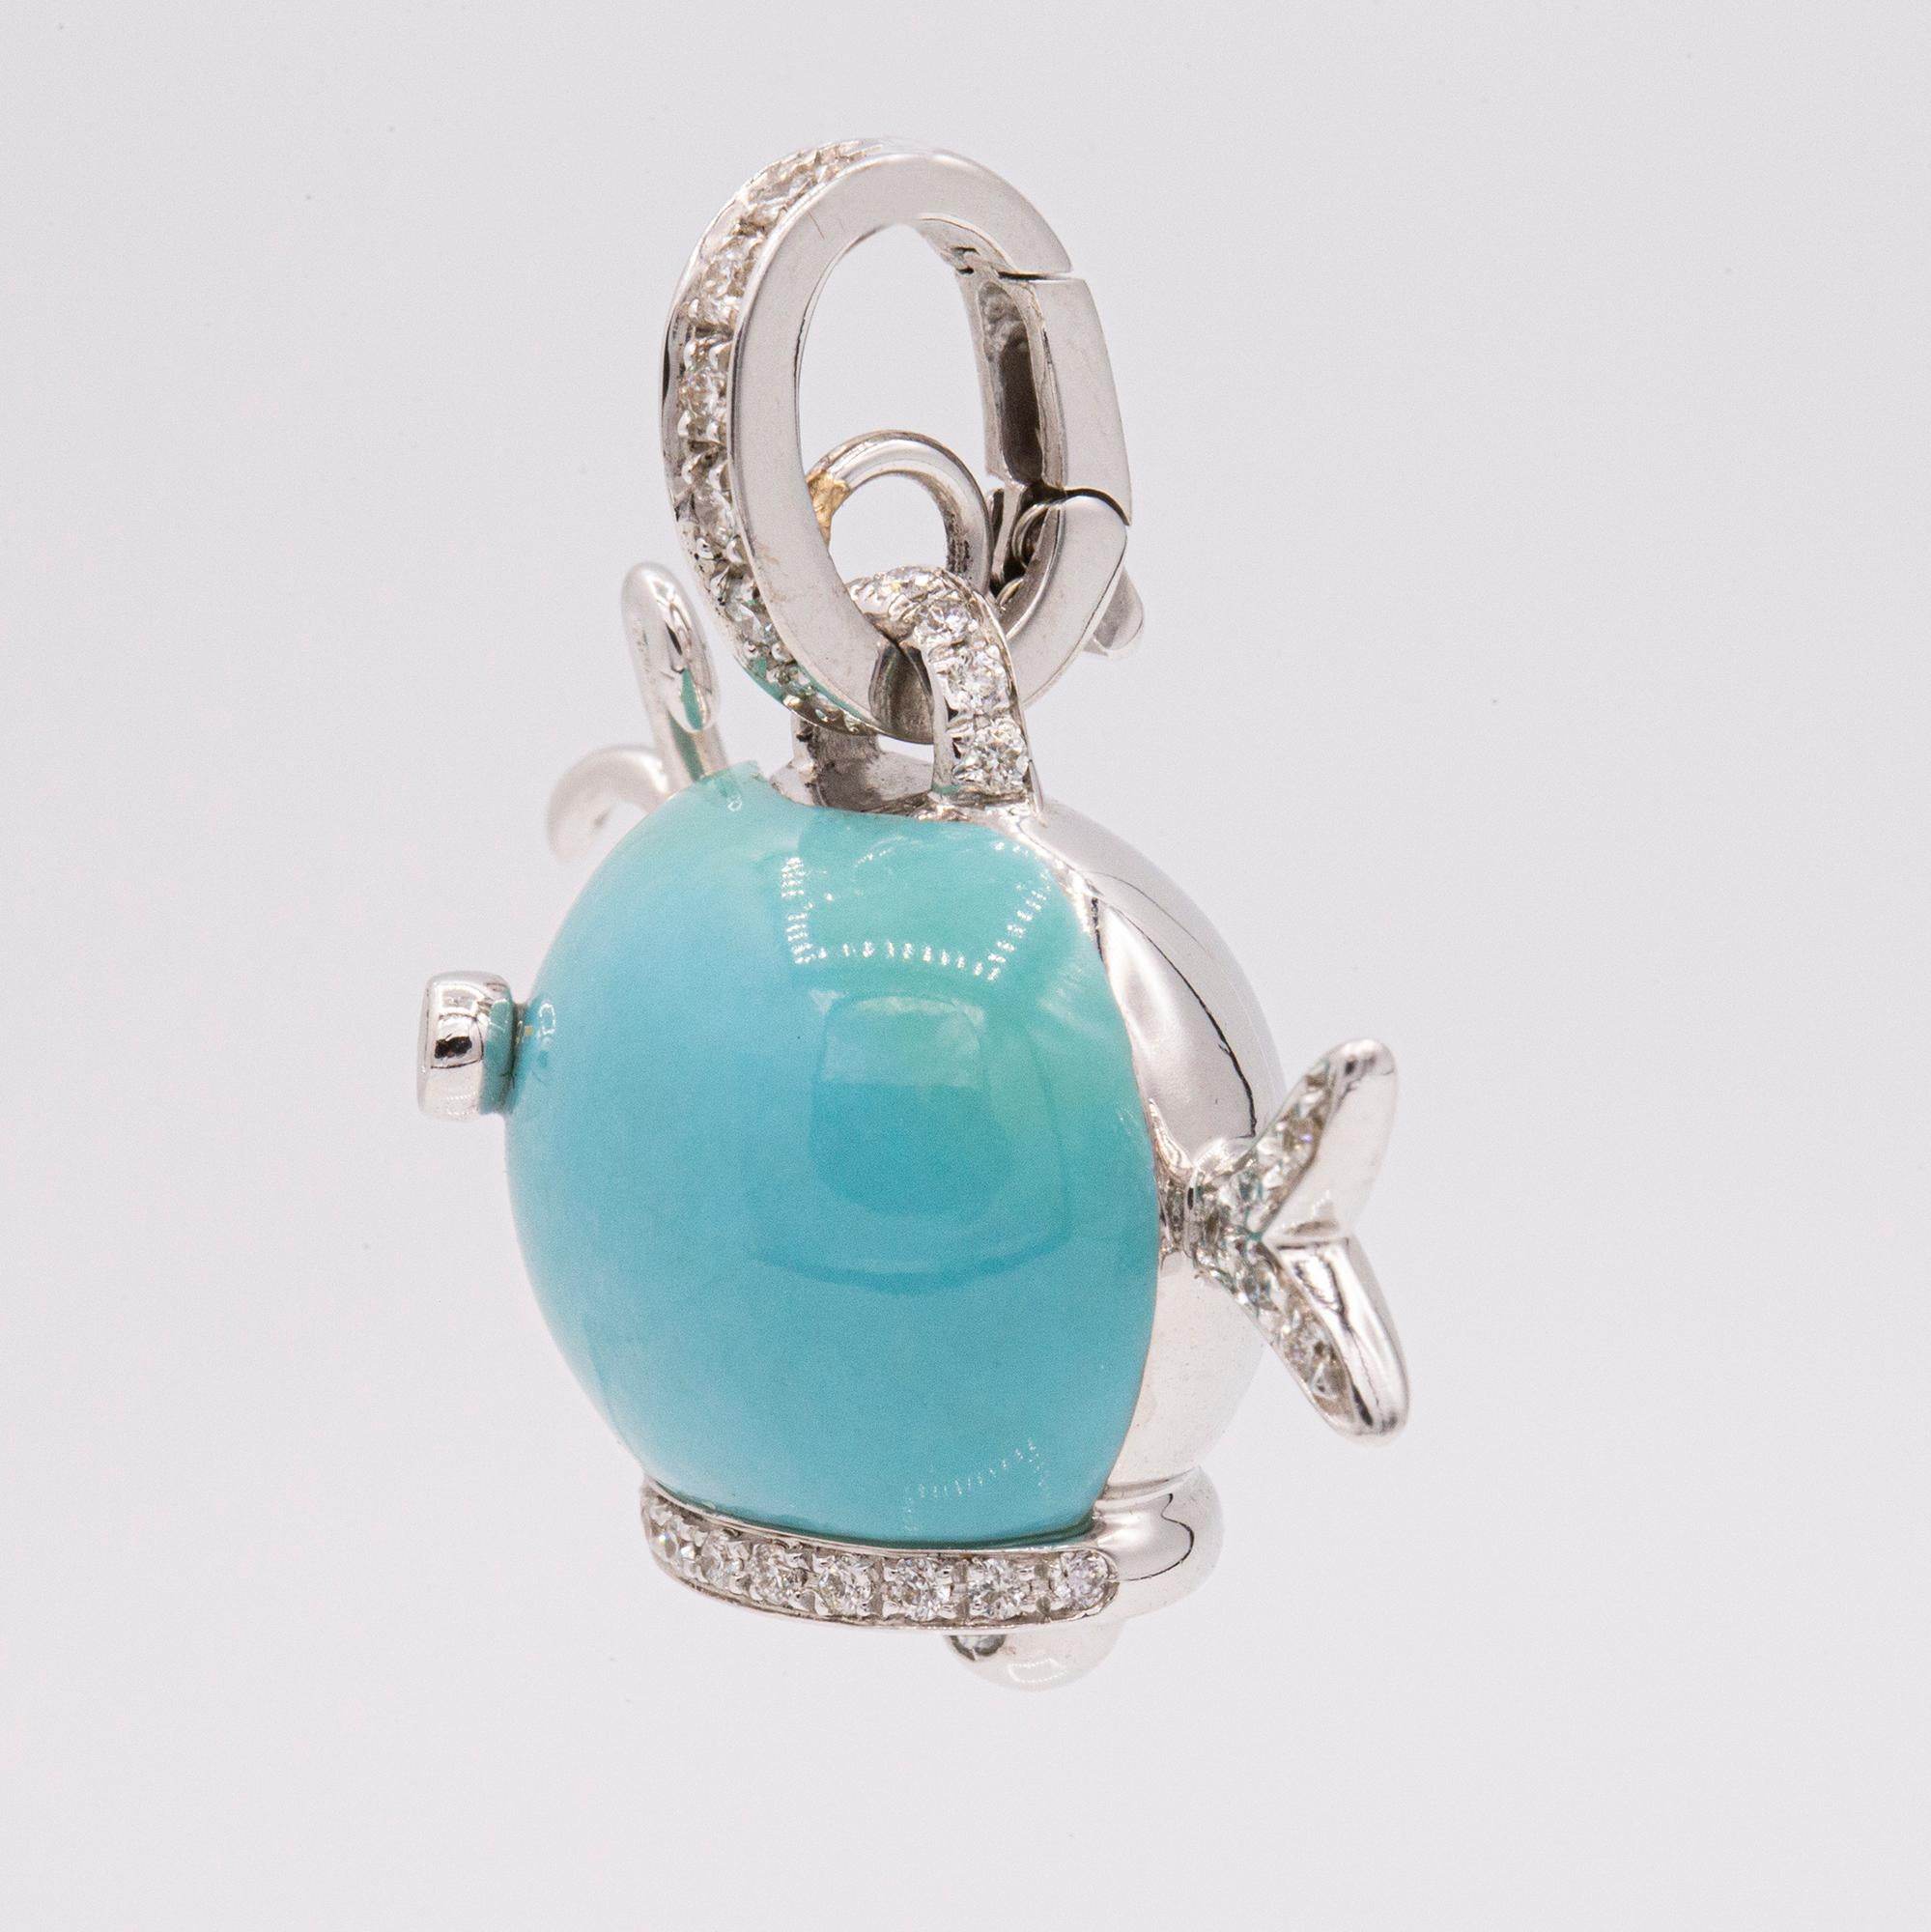 Chantecler jewelry is inspired by the Island of Capri's exotic natural environment. Marinelle whale charm in 18k white gold with turquoise and diamonds.